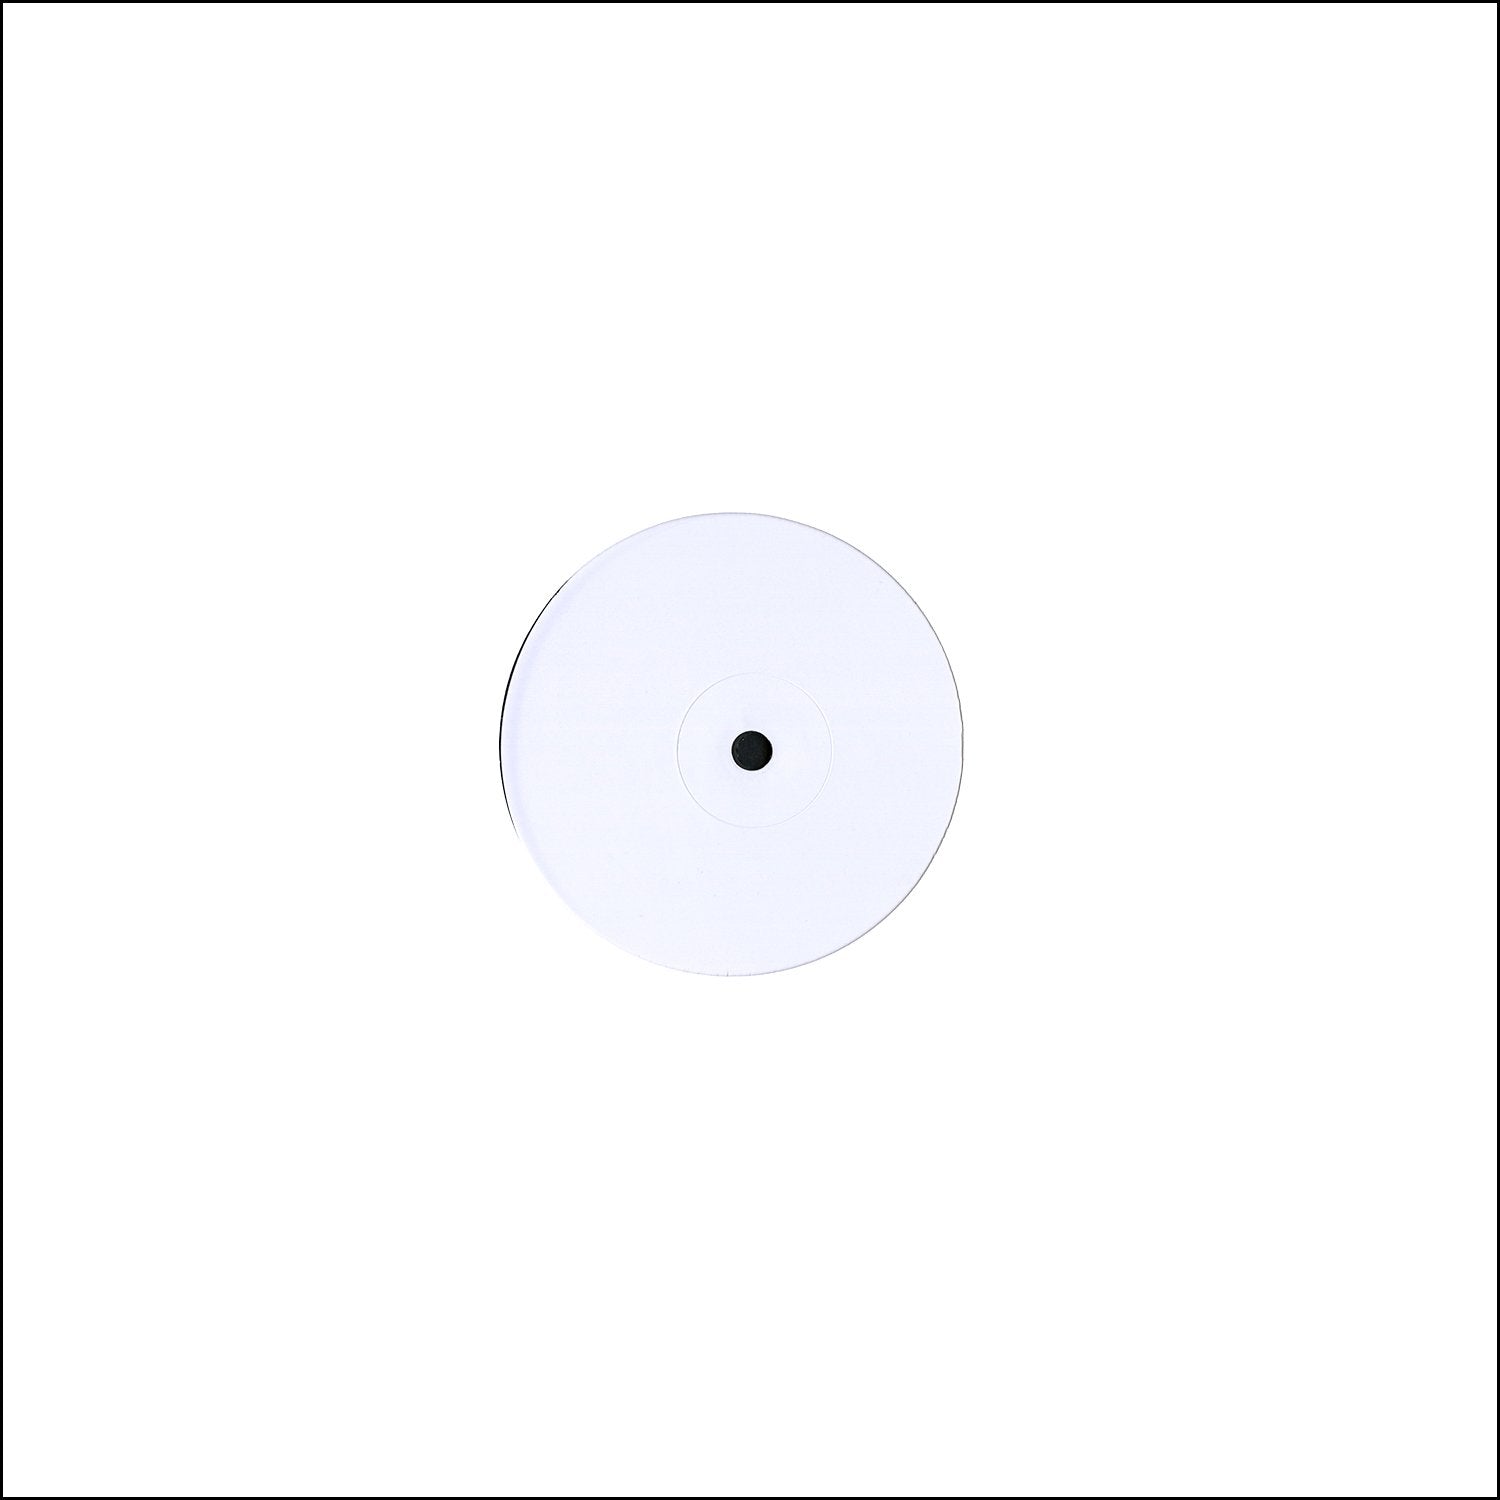 High Noon [Test Pressing]